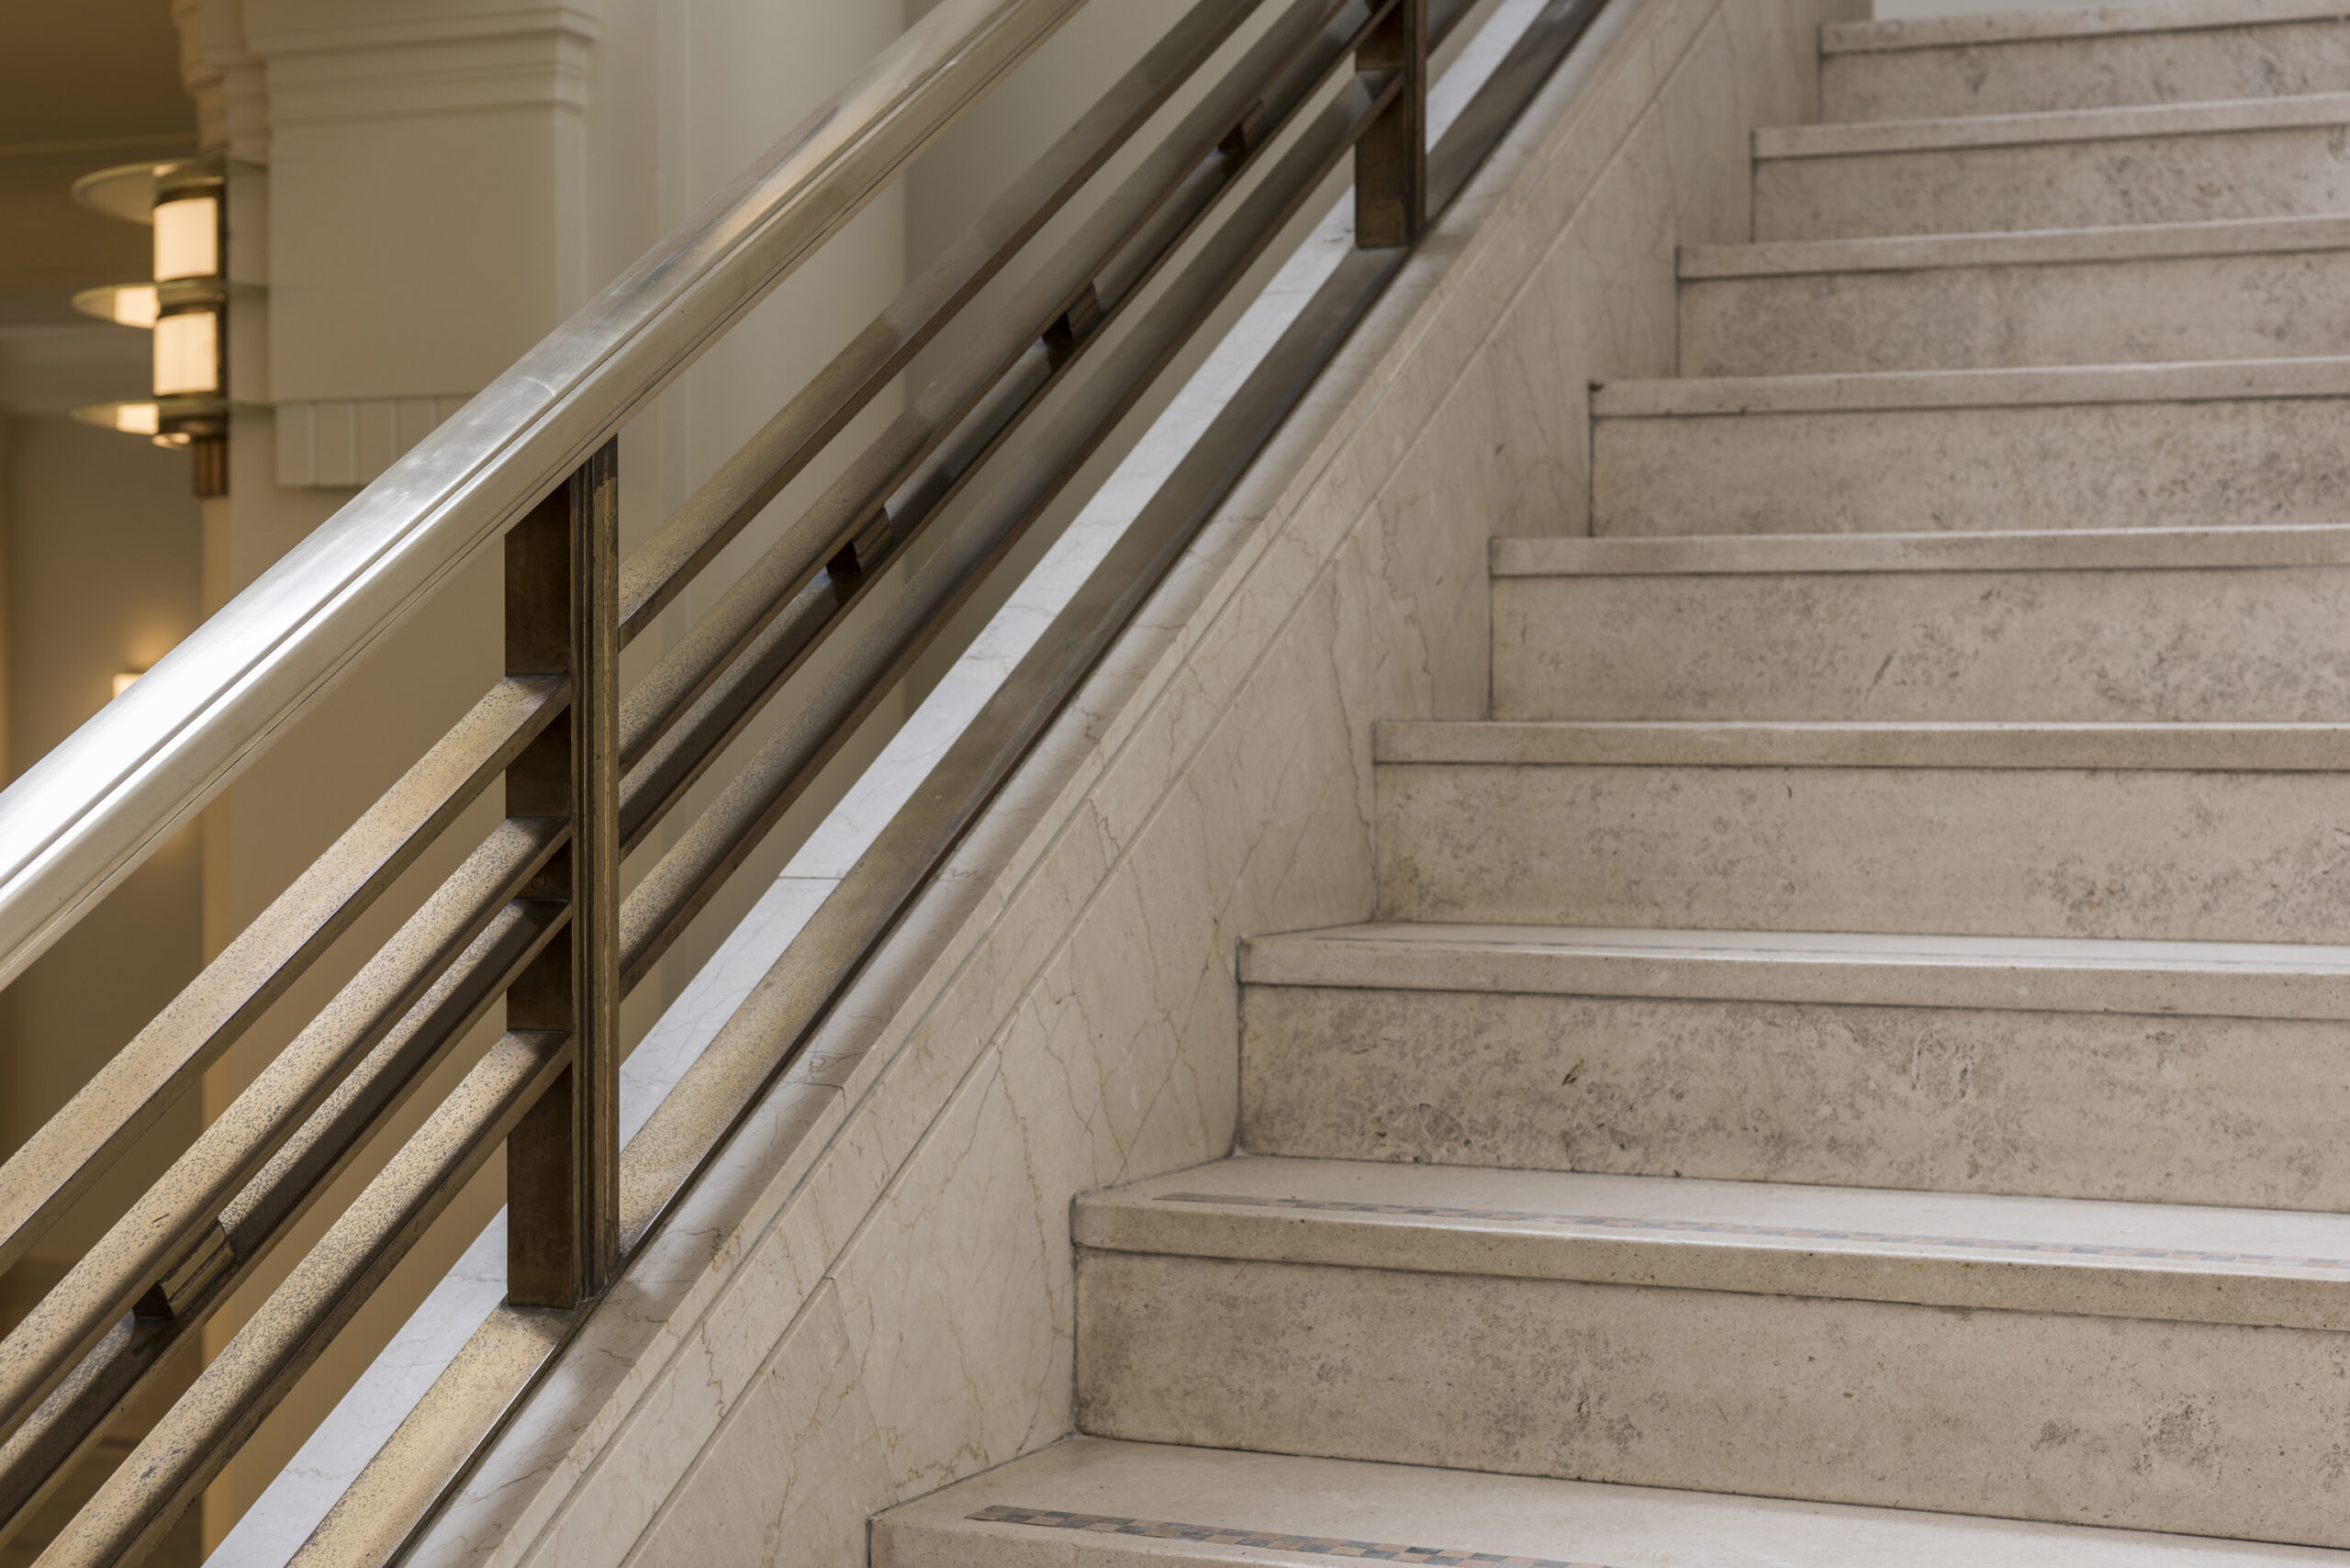 Interior details shot showing stairs and railing at Hackney Town Hall